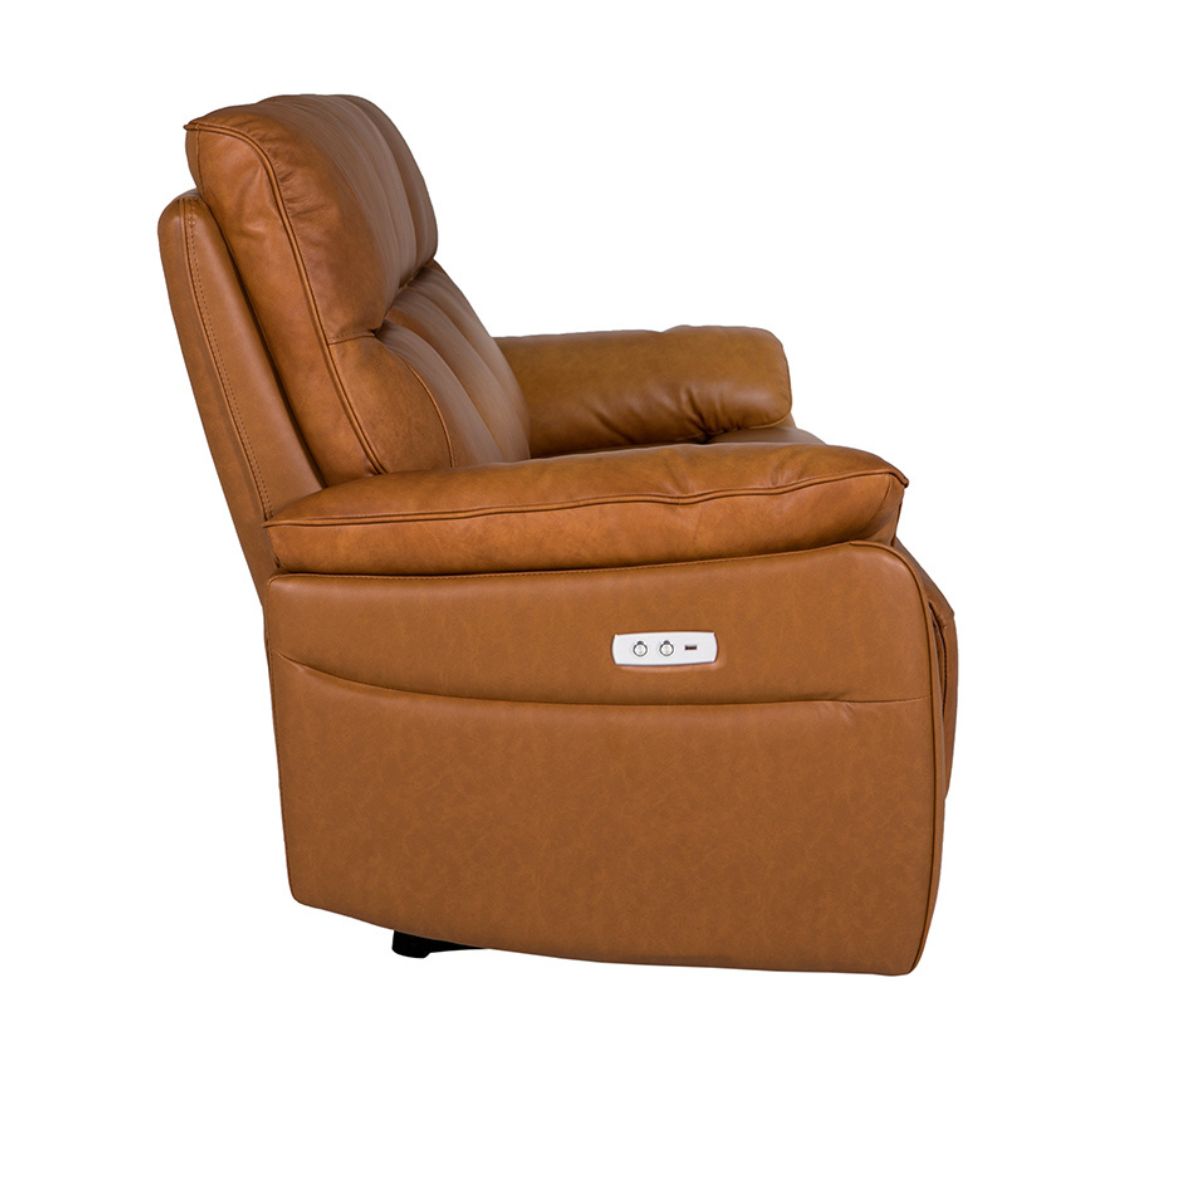 Newport Tan Leather 2 Seater Electric Recliner - 3